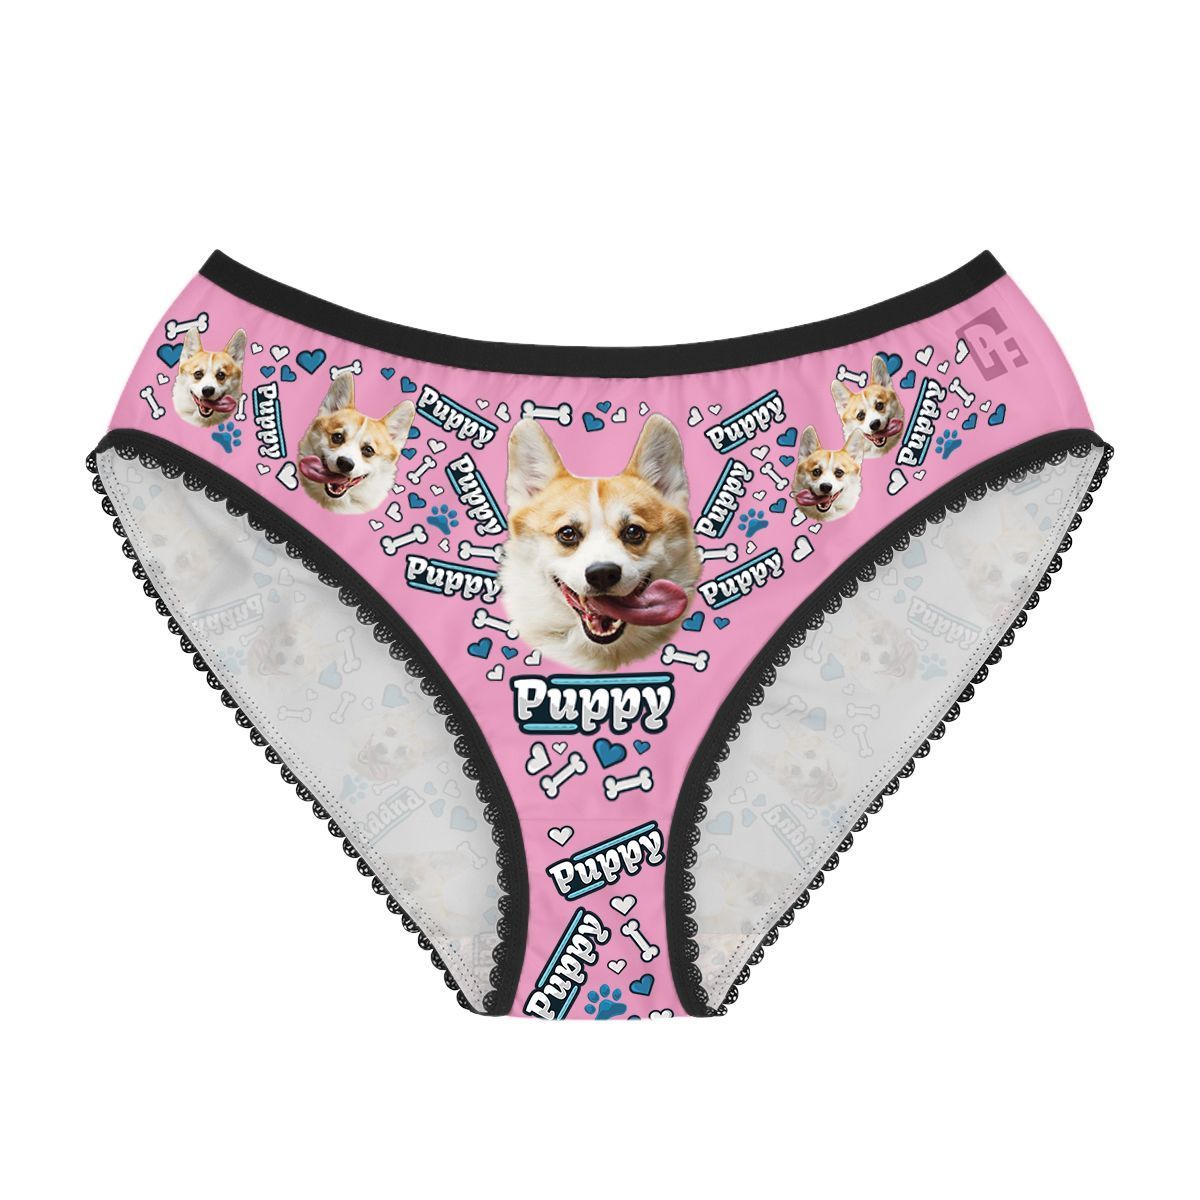 Pink Puppy women's underwear briefs personalized with photo printed on them